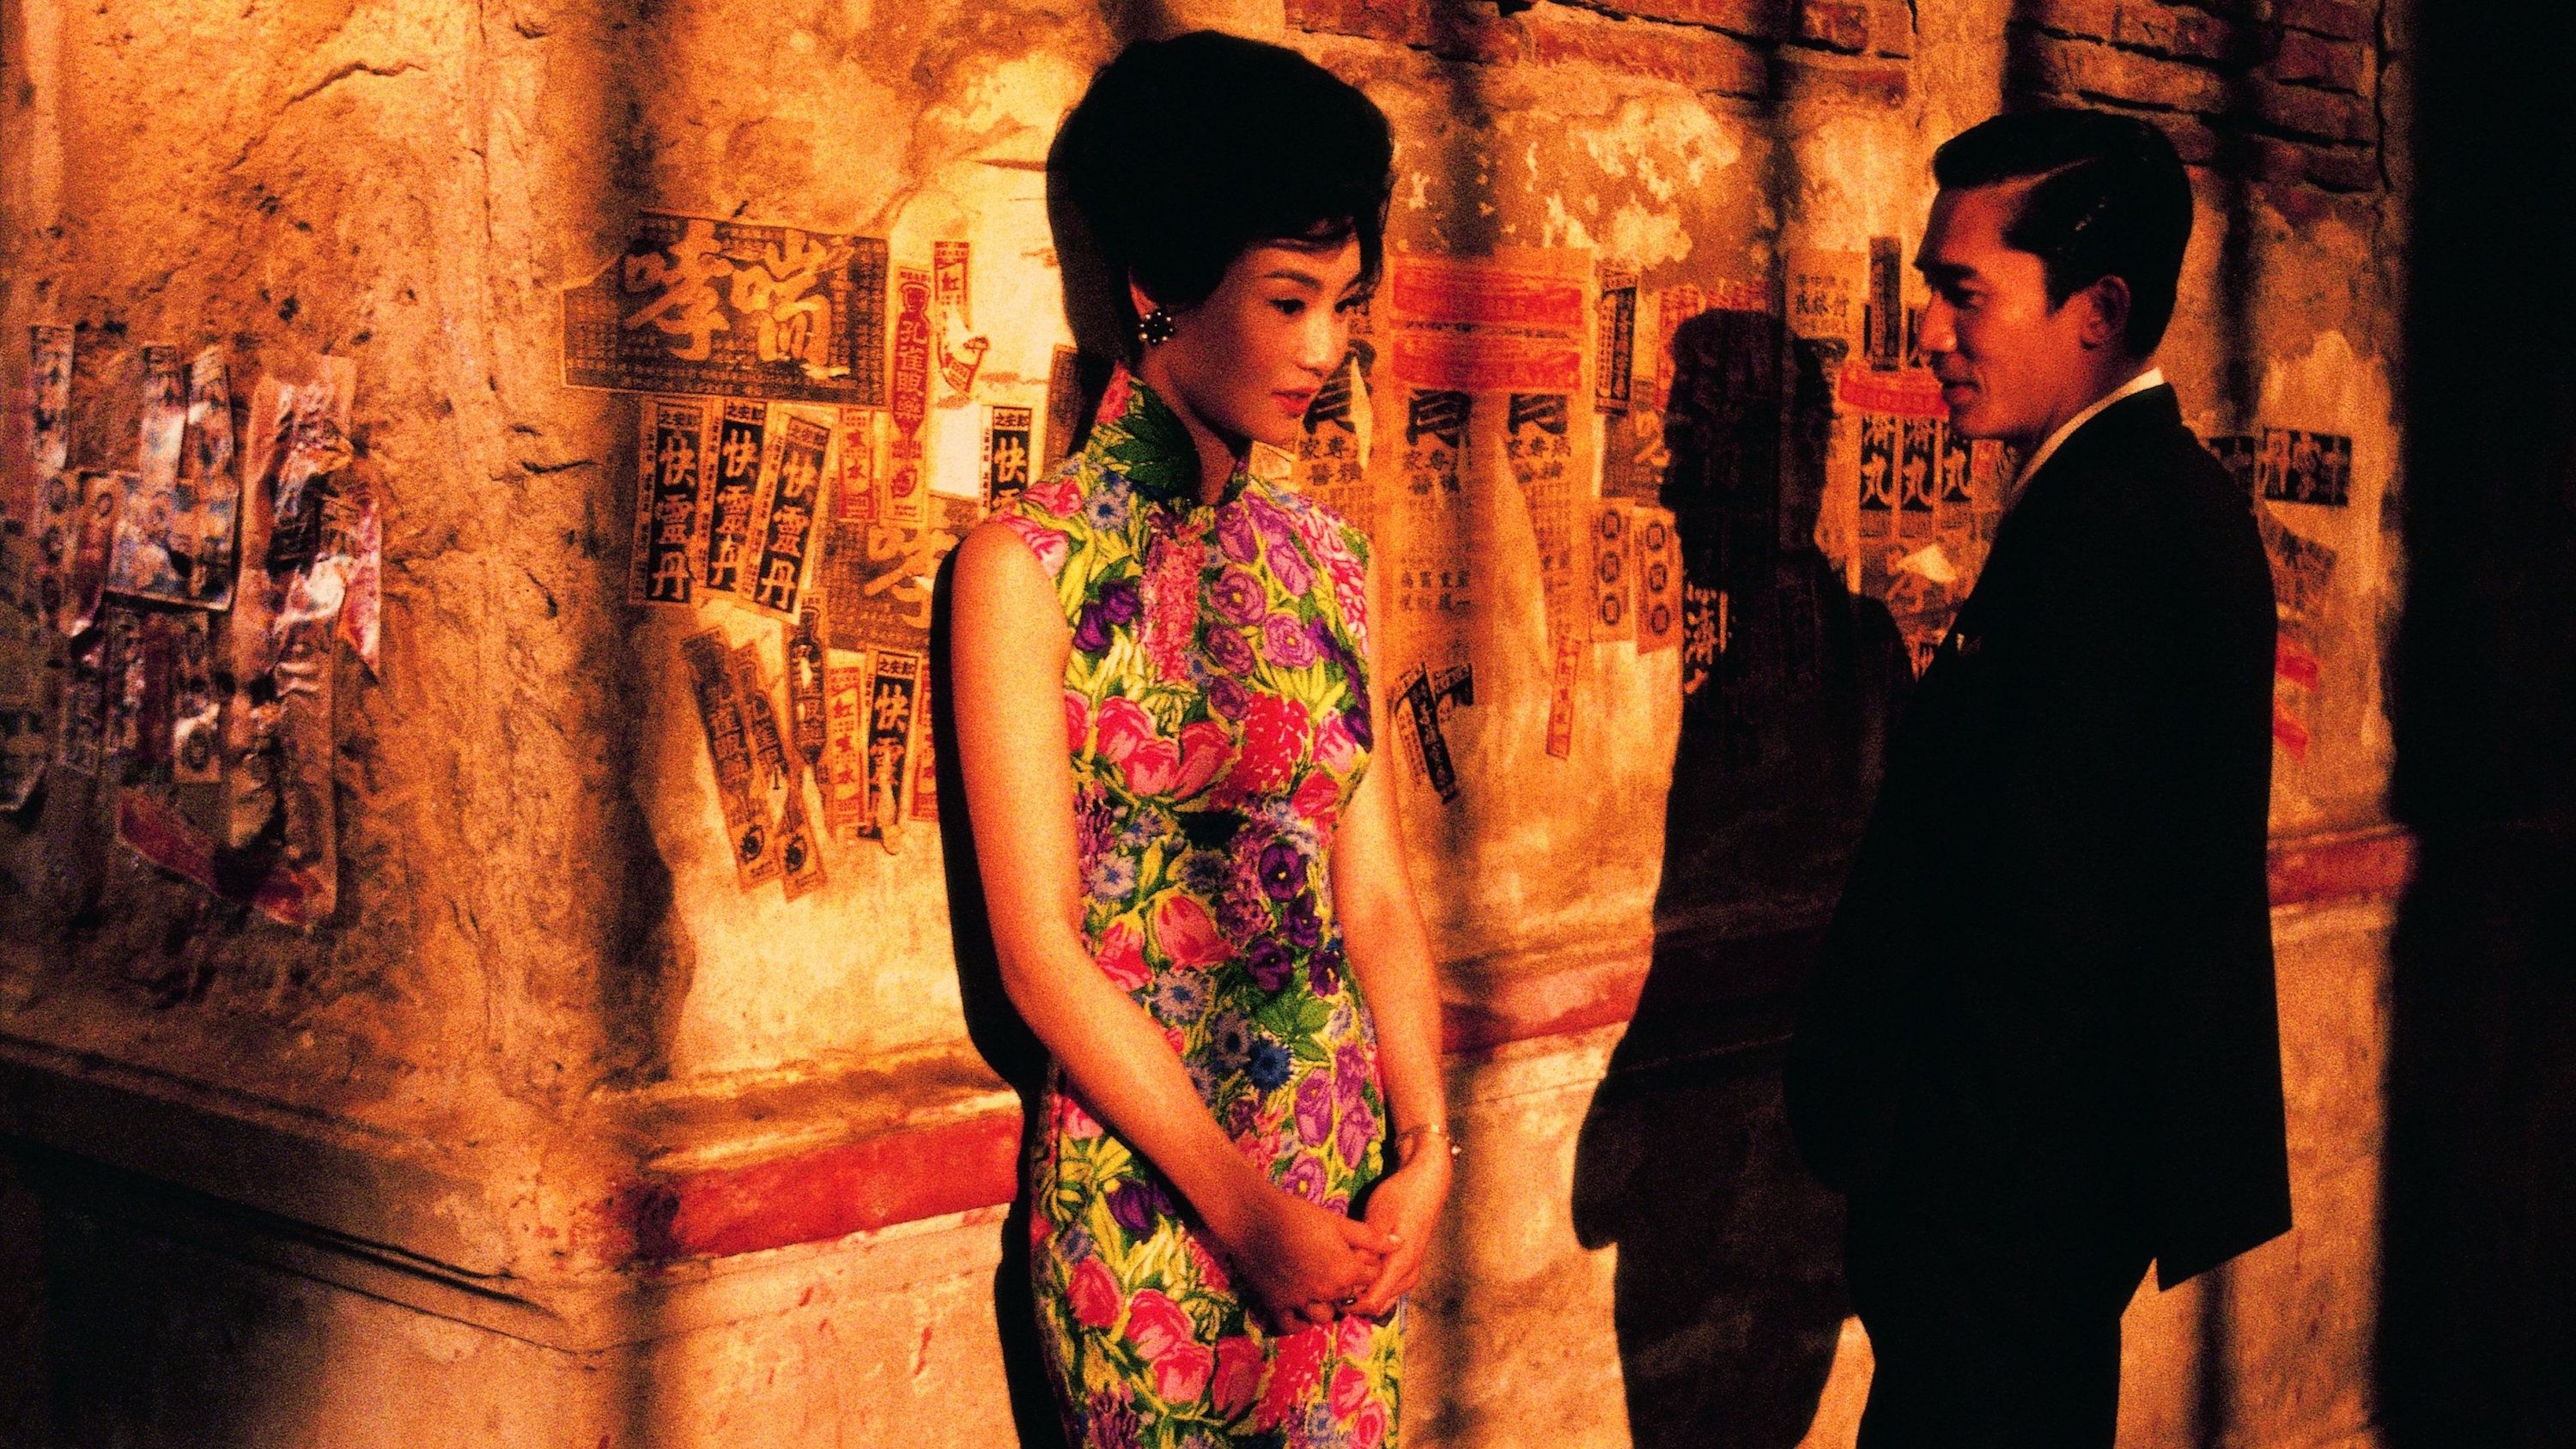 Staying in? Watch these classic Hong Kong movies this holiday season